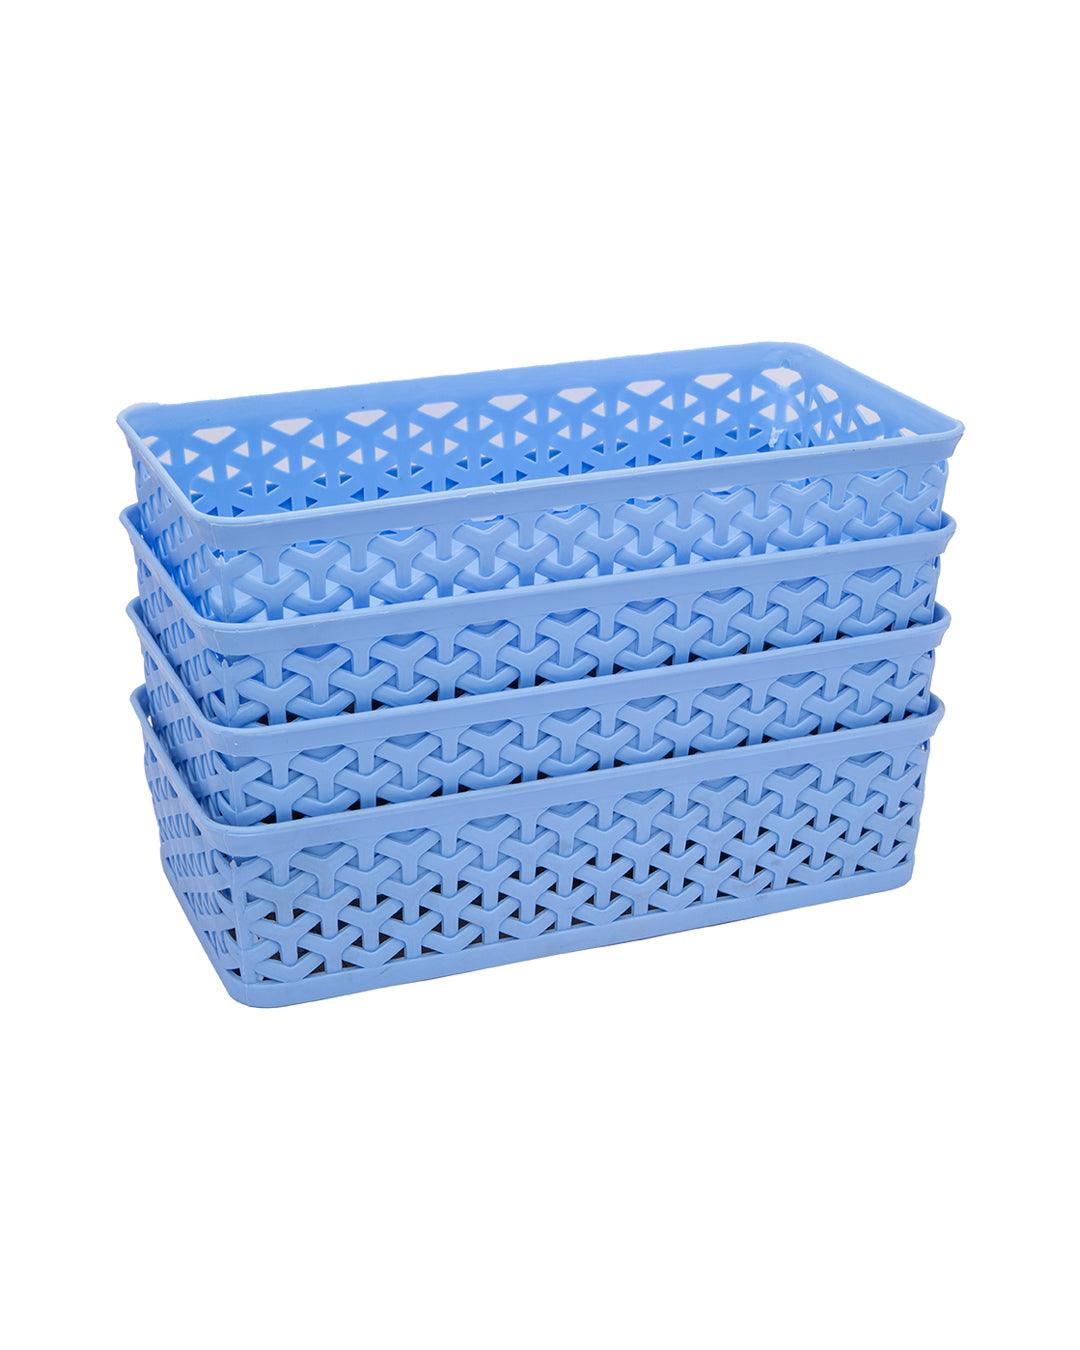 http://market99.com/cdn/shop/files/fashion-and-stationery-storage-baskets-medium-blue-plastic-set-of-4-household-storage-containers-1-29021408985258.jpg?v=1697007447